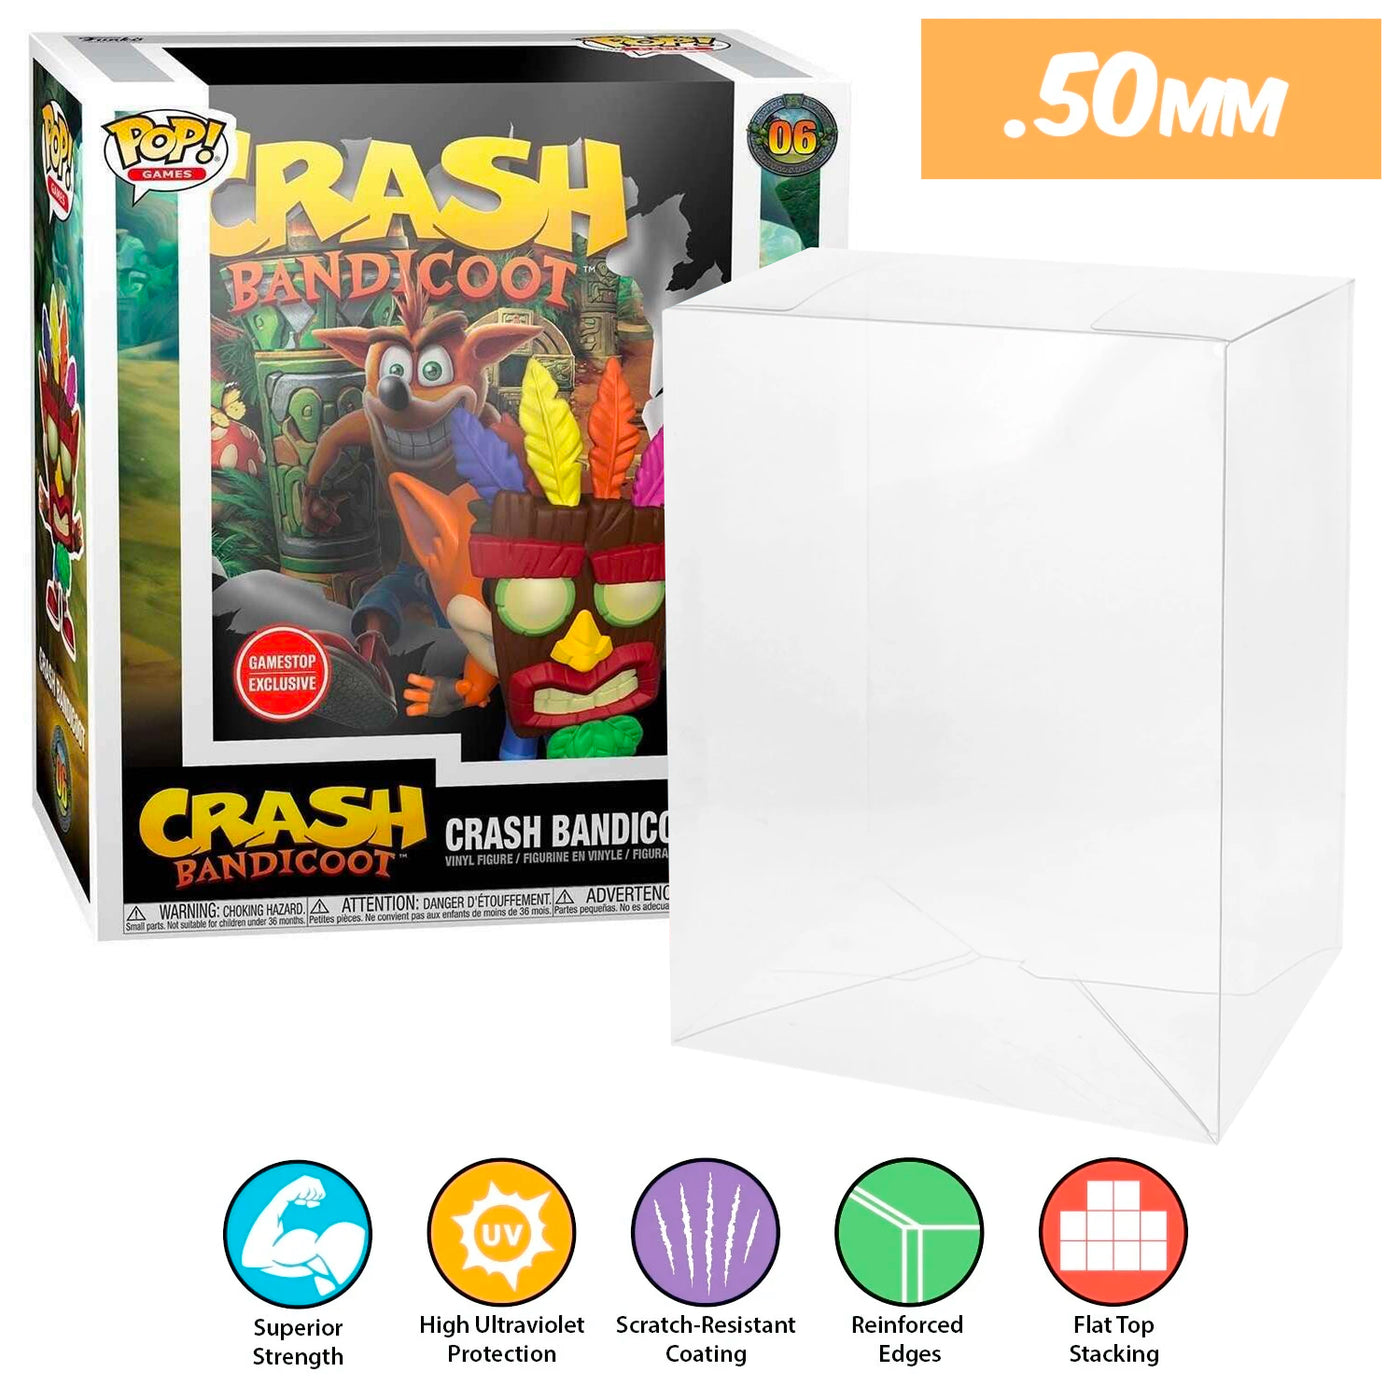 06 crash bandicoot pop game covers best funko pop protectors thick strong uv scratch flat top stack vinyl display geek plastic shield vaulted eco armor fits collect protect display case kollector protector